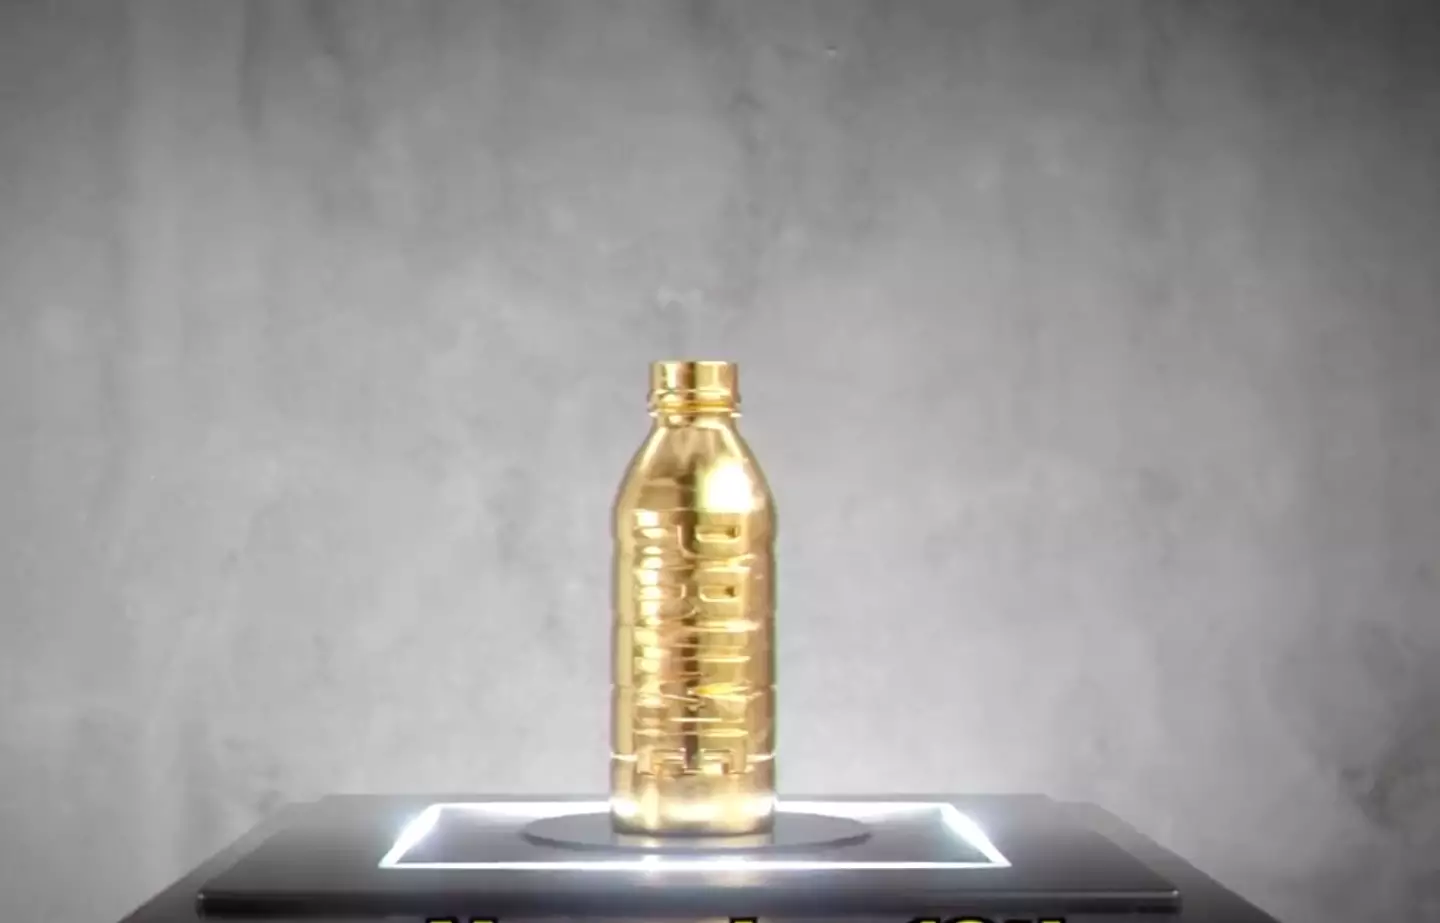 The gold Prime bottle will be encased in bullet proof glass and can only be unlocked with the correct six-digit code.